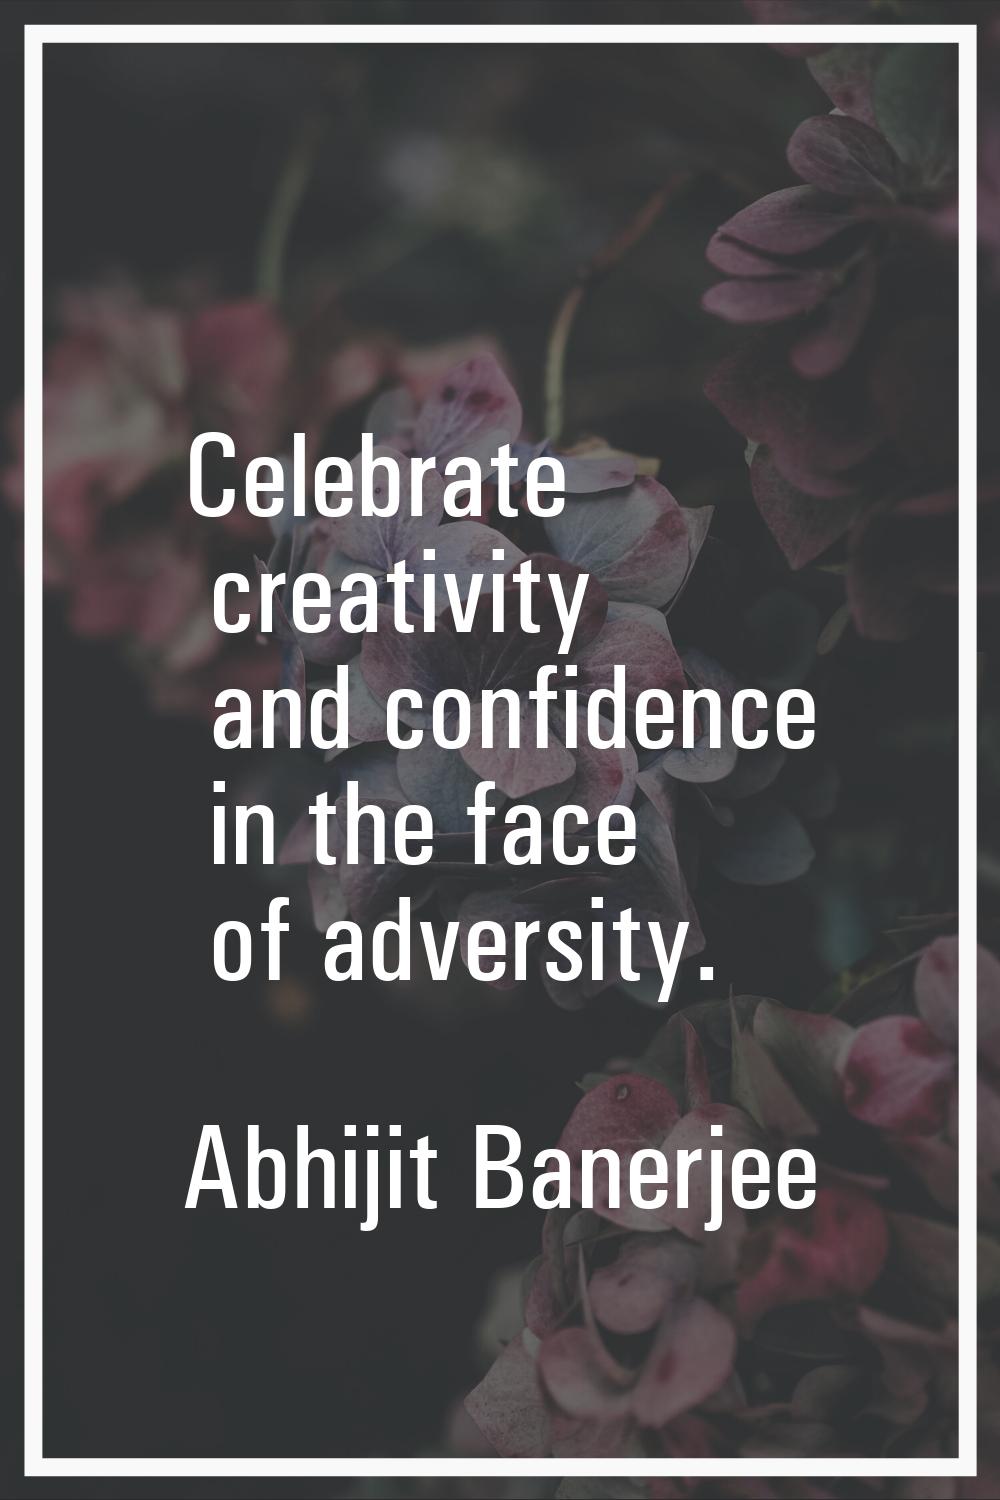 Celebrate creativity and confidence in the face of adversity.